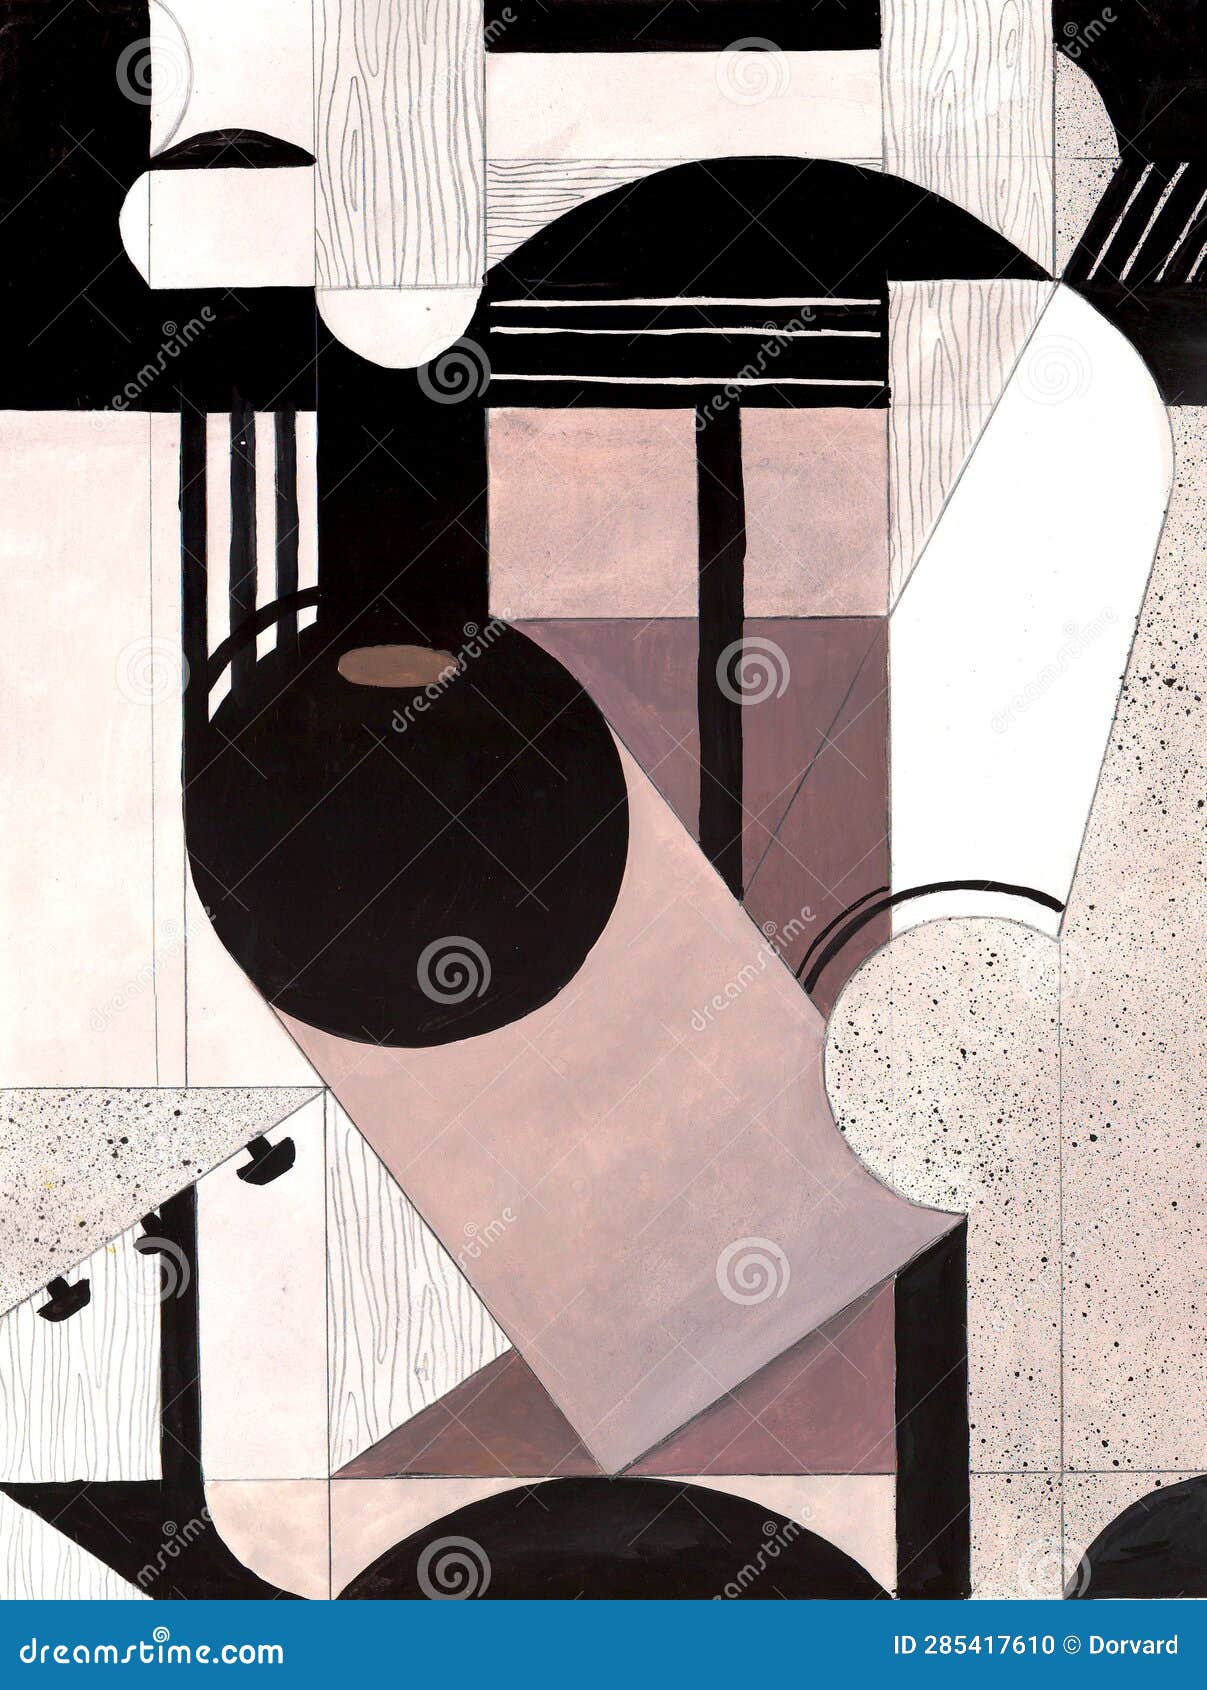 graphic composition in the style of juan gris